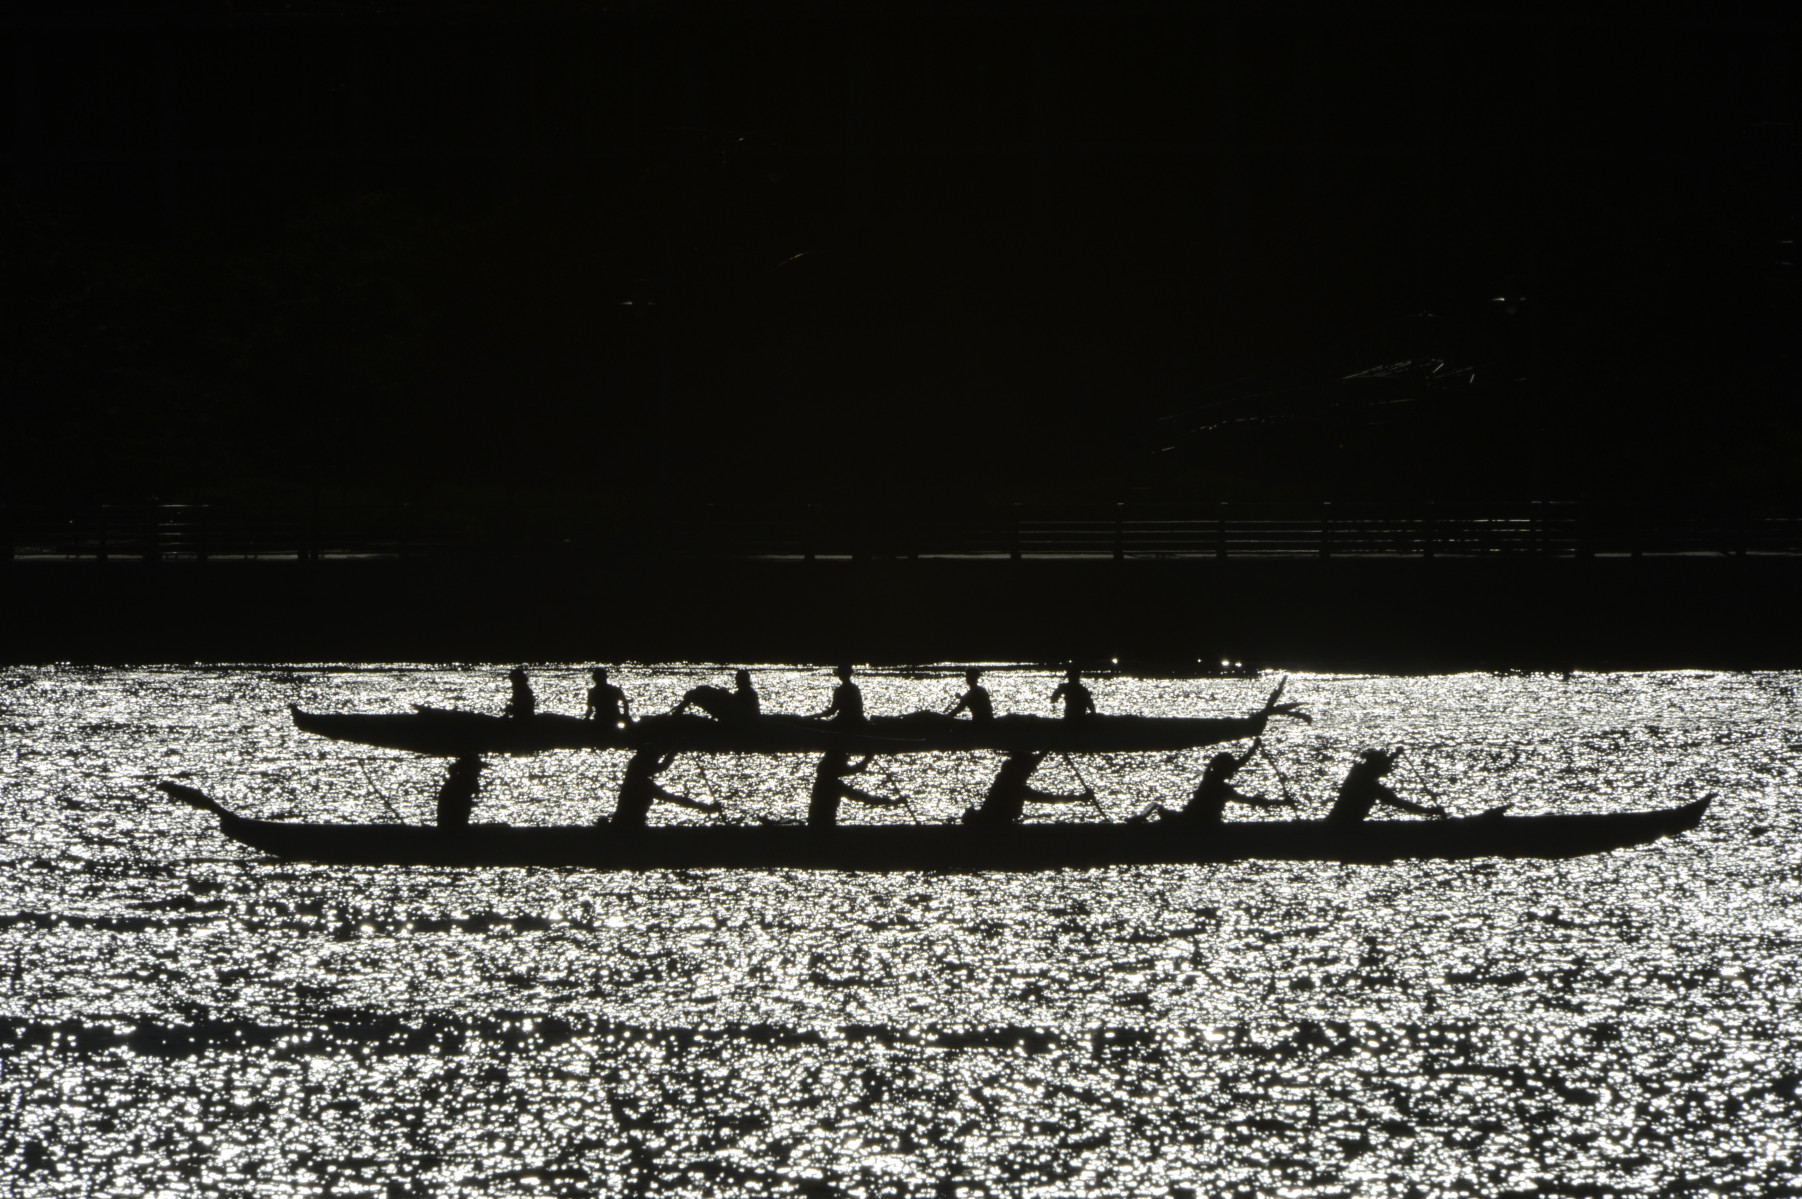 Outrigger canoes : Sports : Photography by Adam Stoltman: Sports Photography, The Arts, Portraiture, Travel, Photojournalism and Fine Art in New York